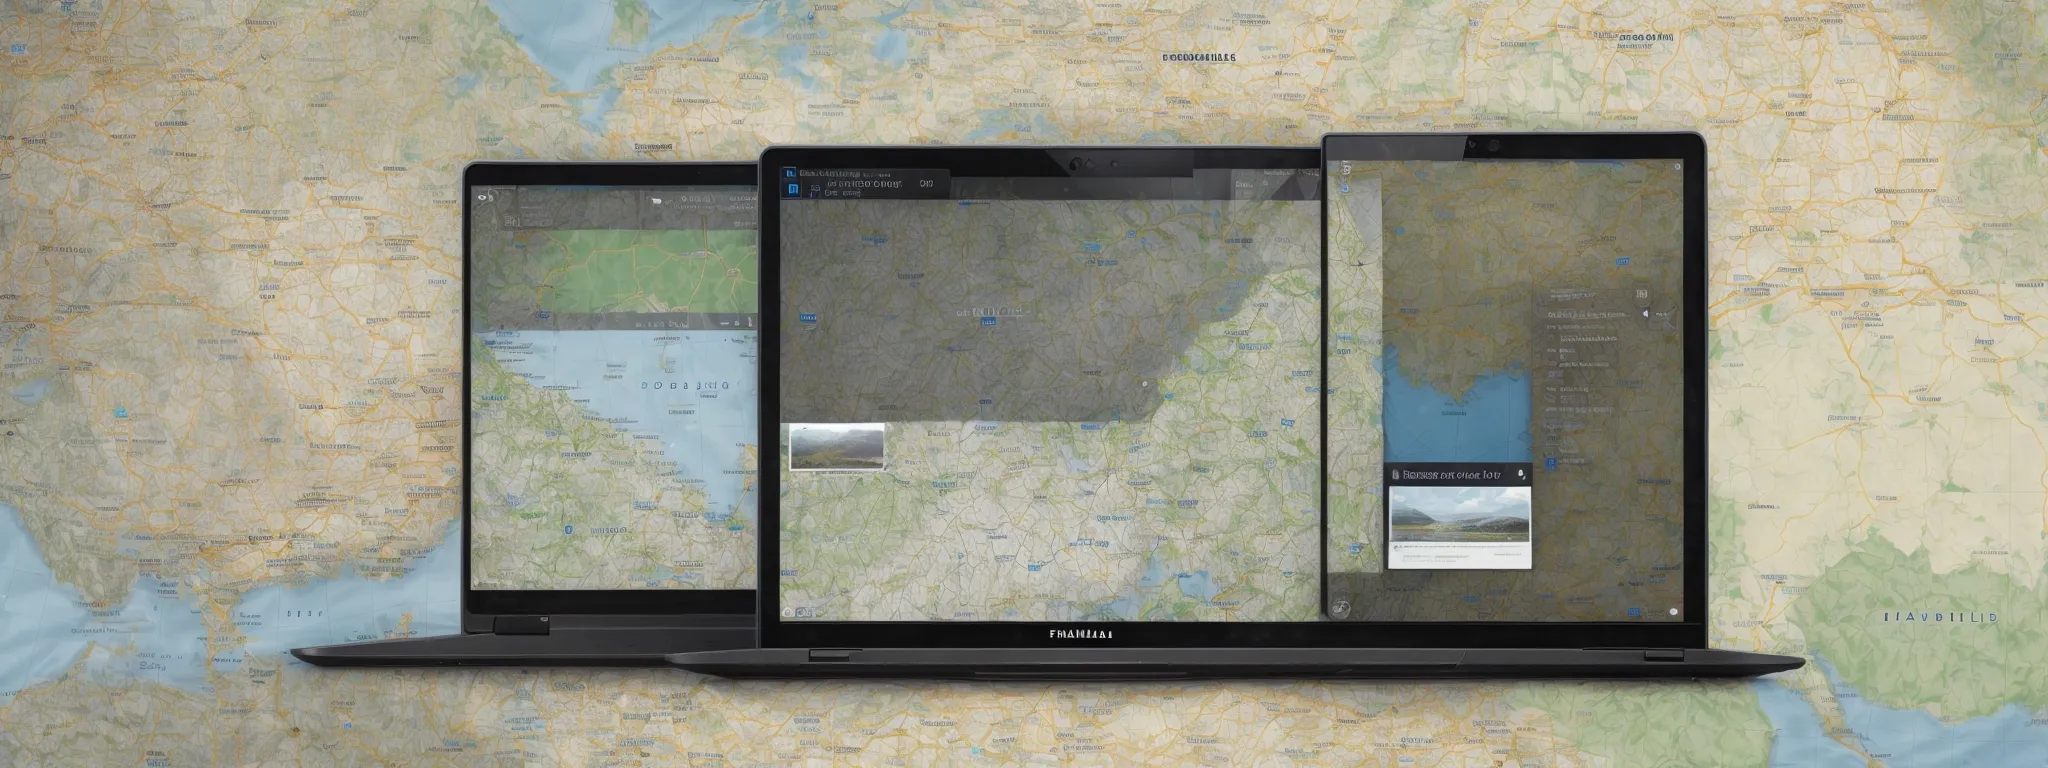 a laptop with a map overlay displays various connected points symbolizing a local digital network.